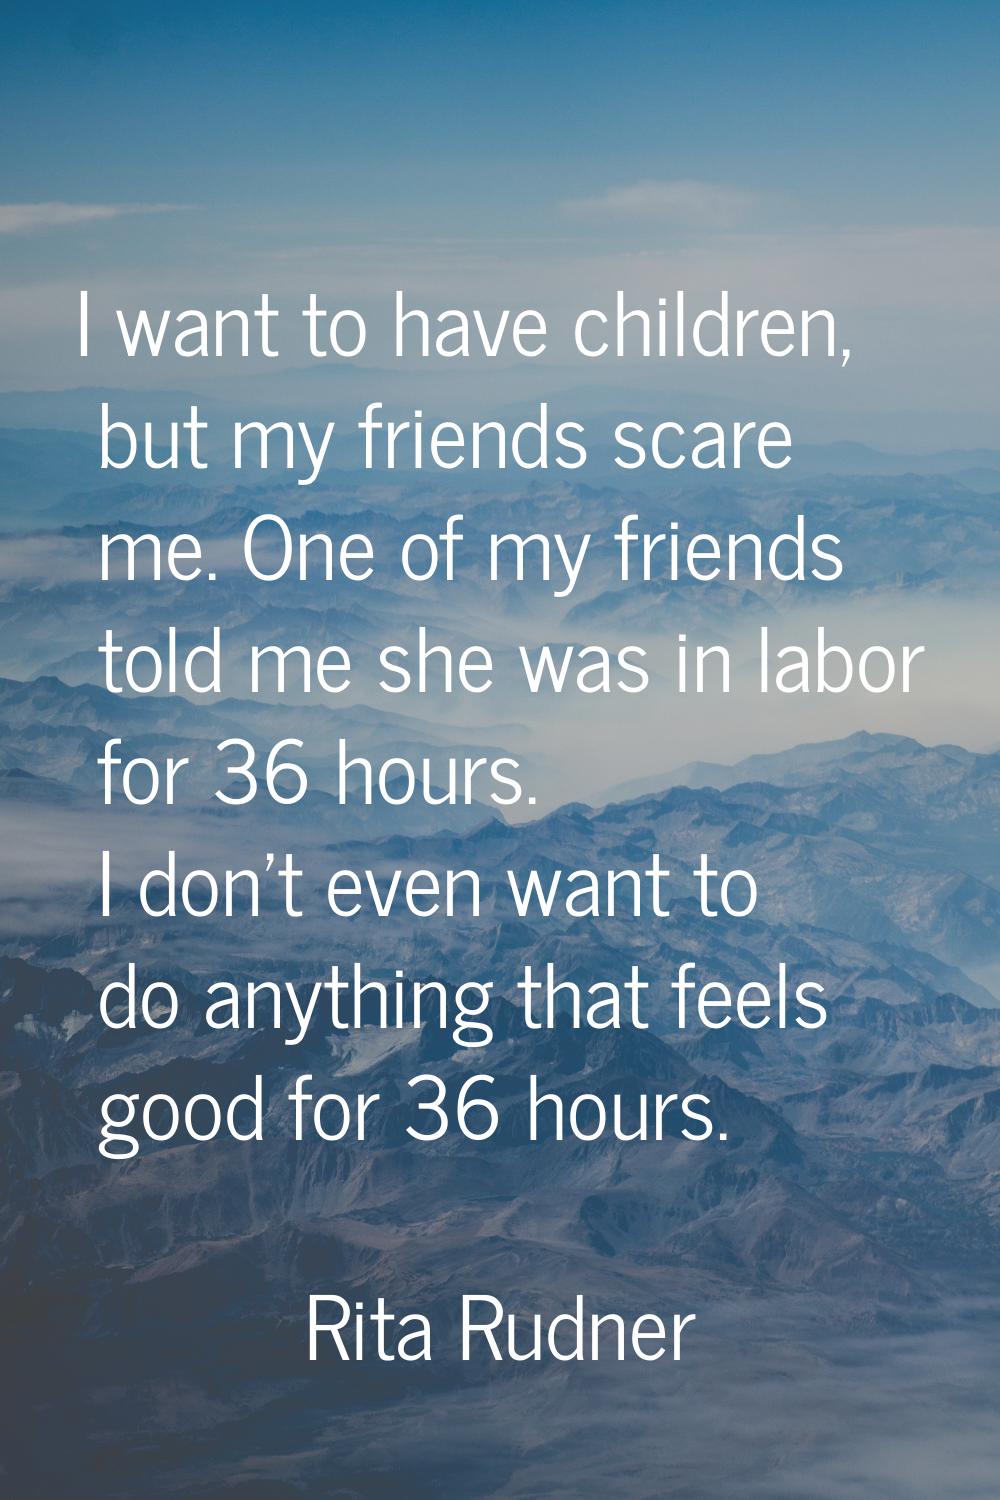 I want to have children, but my friends scare me. One of my friends told me she was in labor for 36